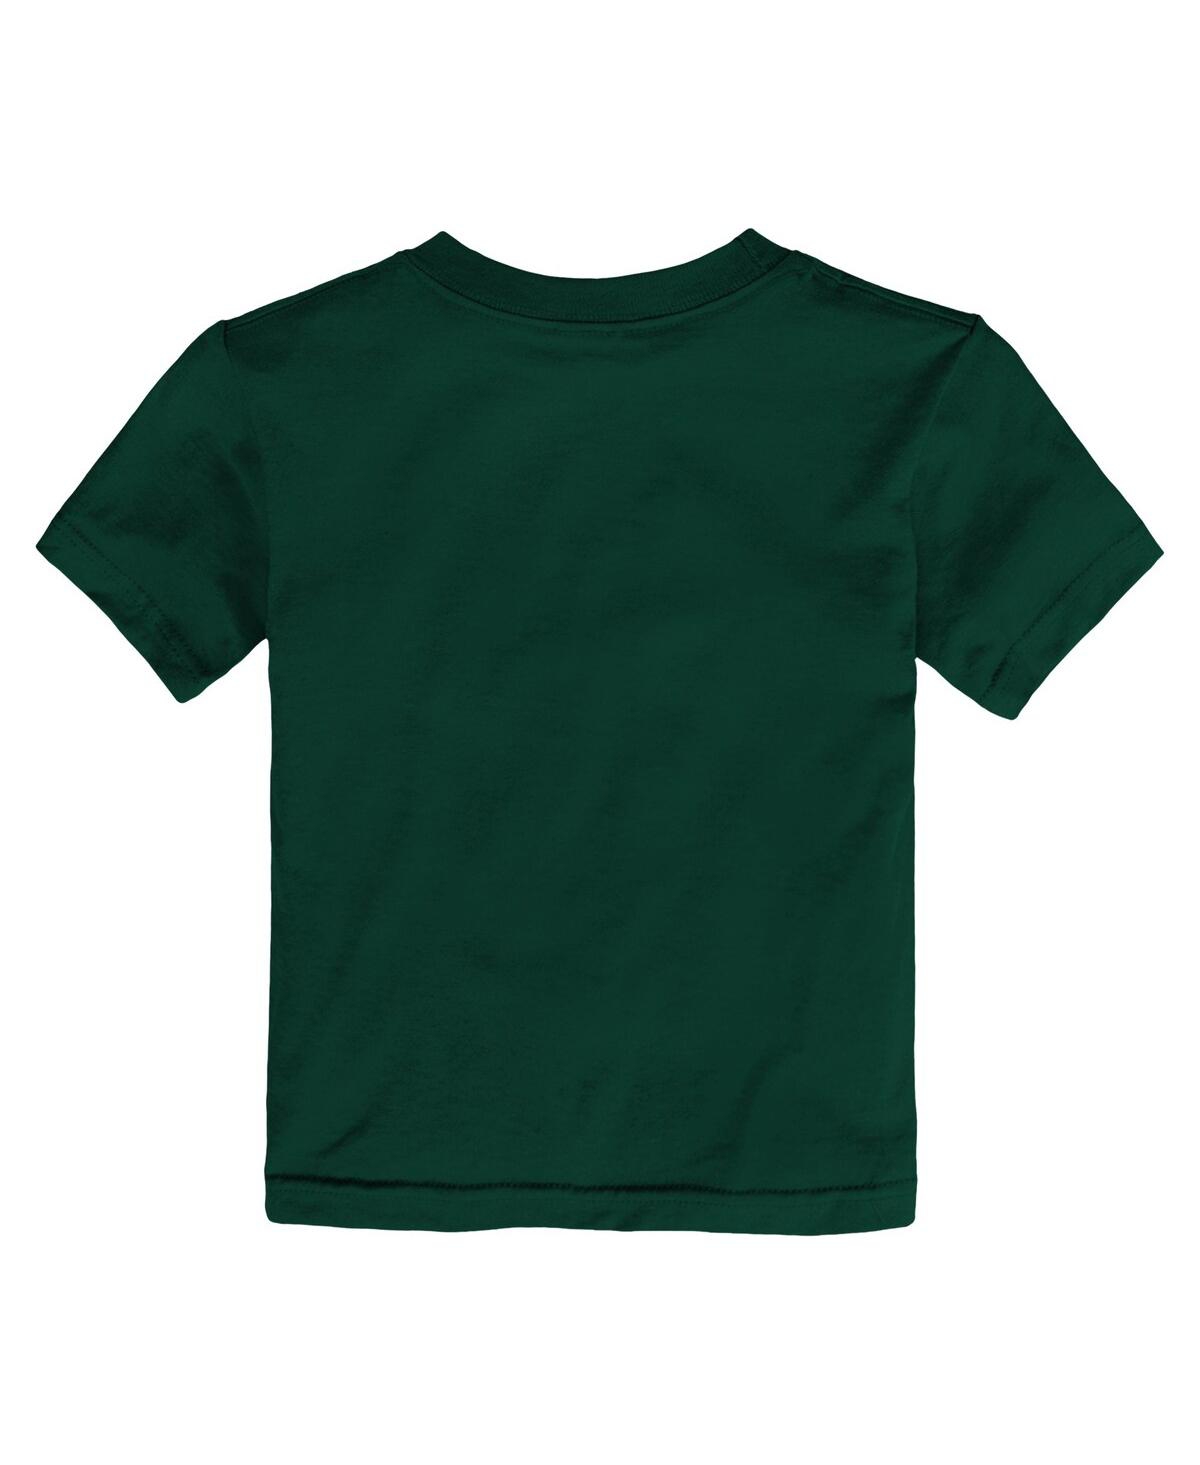 Shop Nike Toddler Boys And Girls  Hunter Green Colorado Rockies City Connect Graphic T-shirt